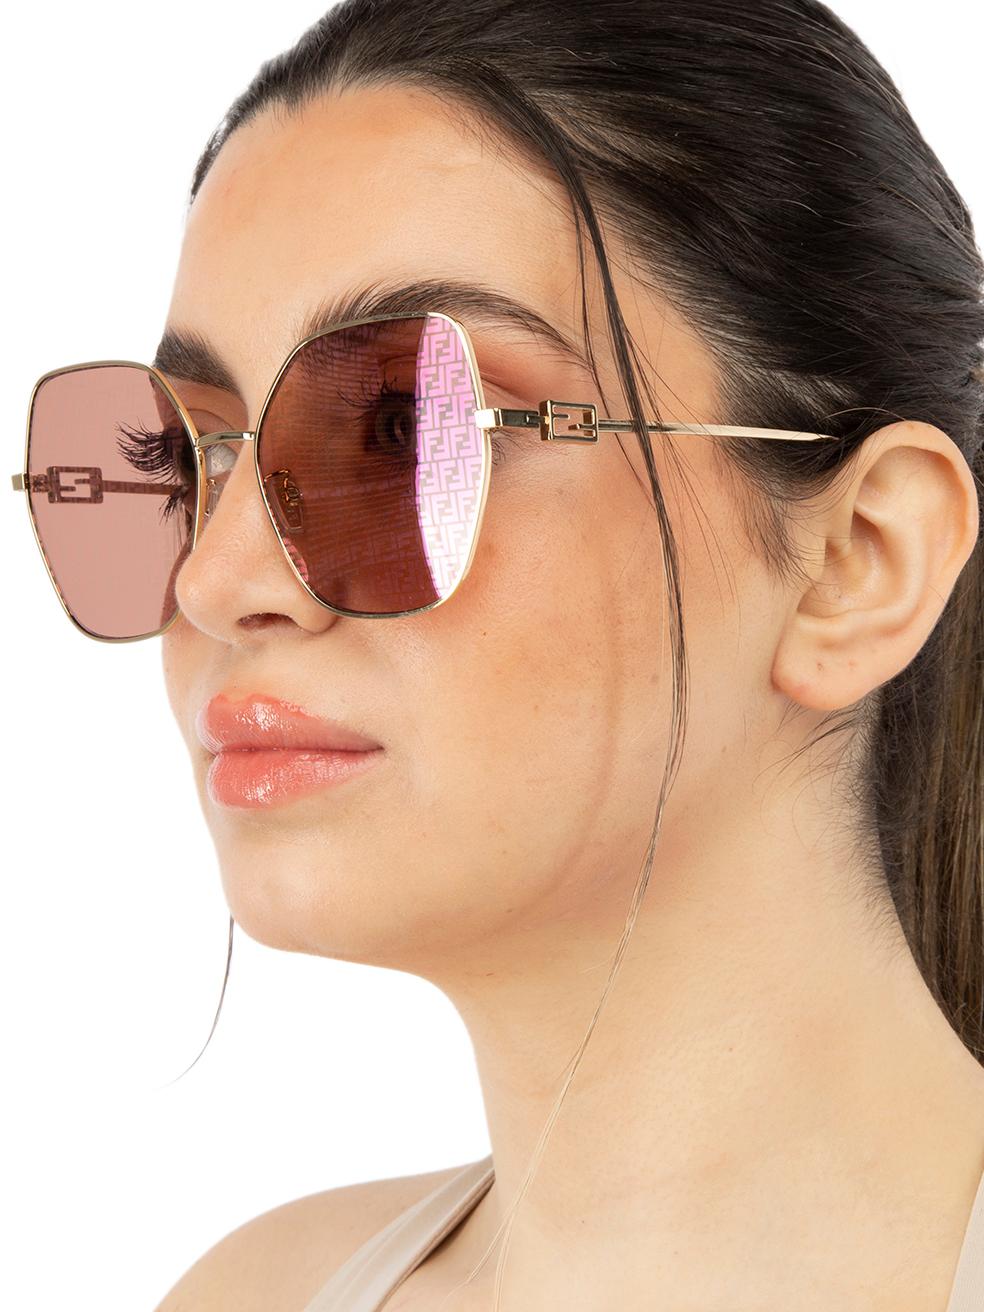 CONDITIONisNew with tags on this brand new Fendi designer item. This item comes with original packaging.
 
 
 
 Details
 
 
 Model: FE40033U
 
 Shiny Gold Dh
 
 Metal
 
 Sunglasses
 
 Butterfly Frame
 
 Dark Pink w Logo Lens
 
 Full-Rim
 
 100% UV